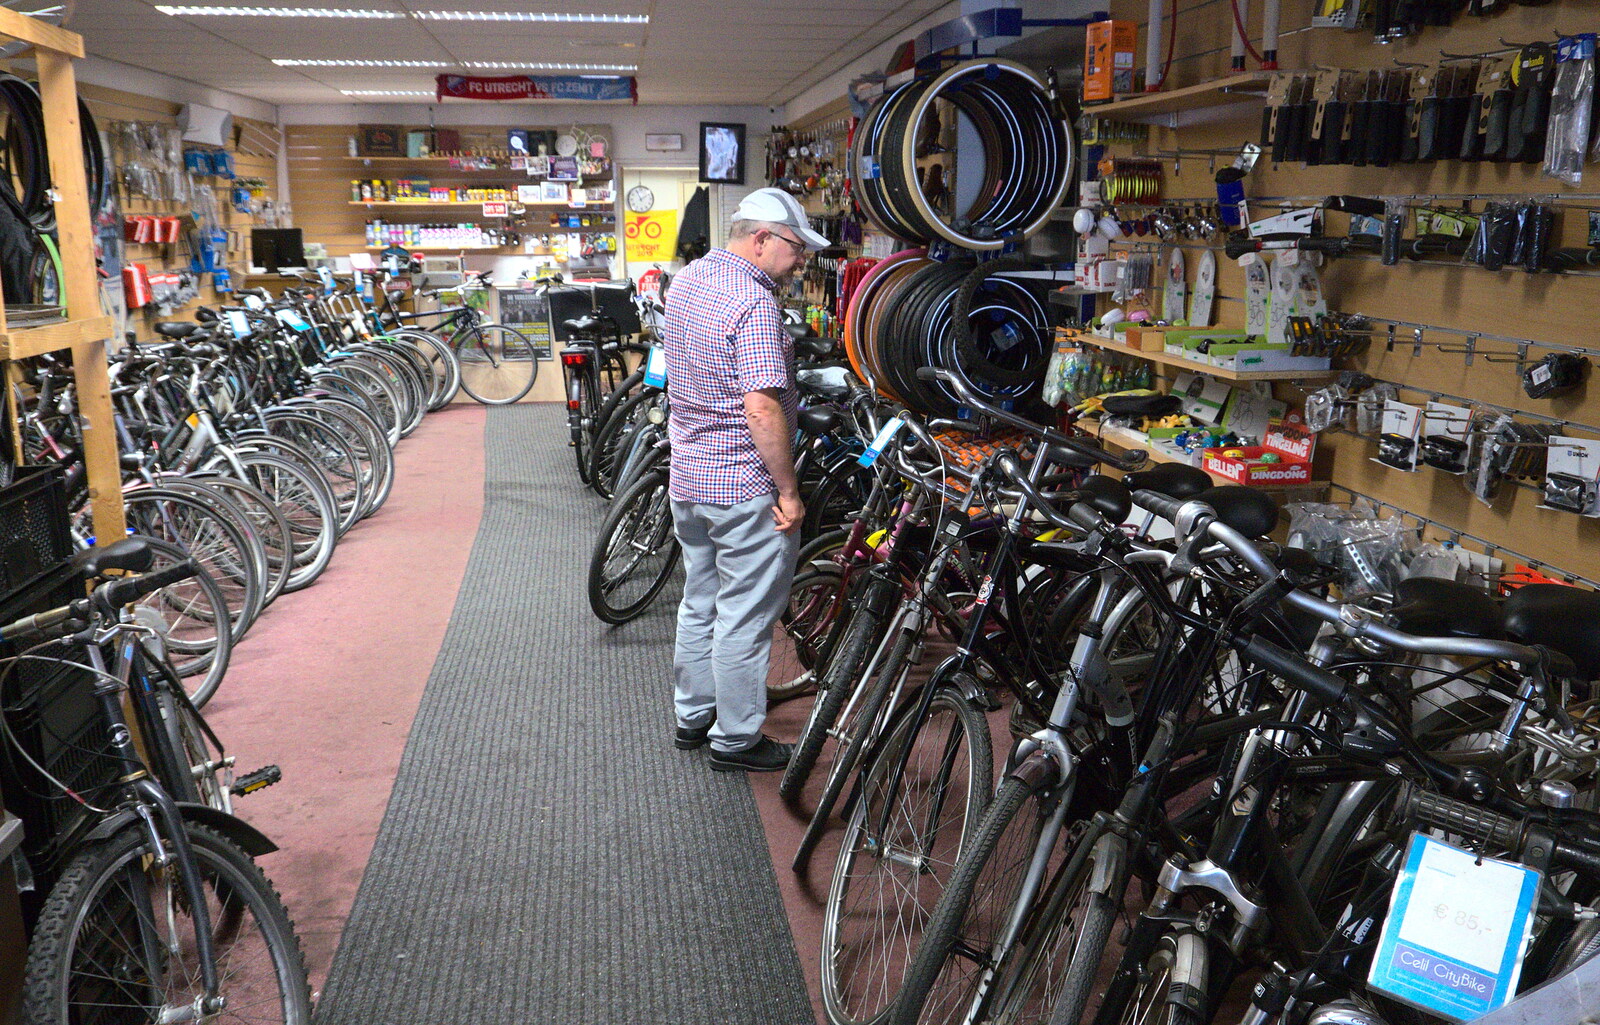 Hamish has a poke around in a bike shop from A Postcard from Utrecht, Nederlands - 10th June 2018